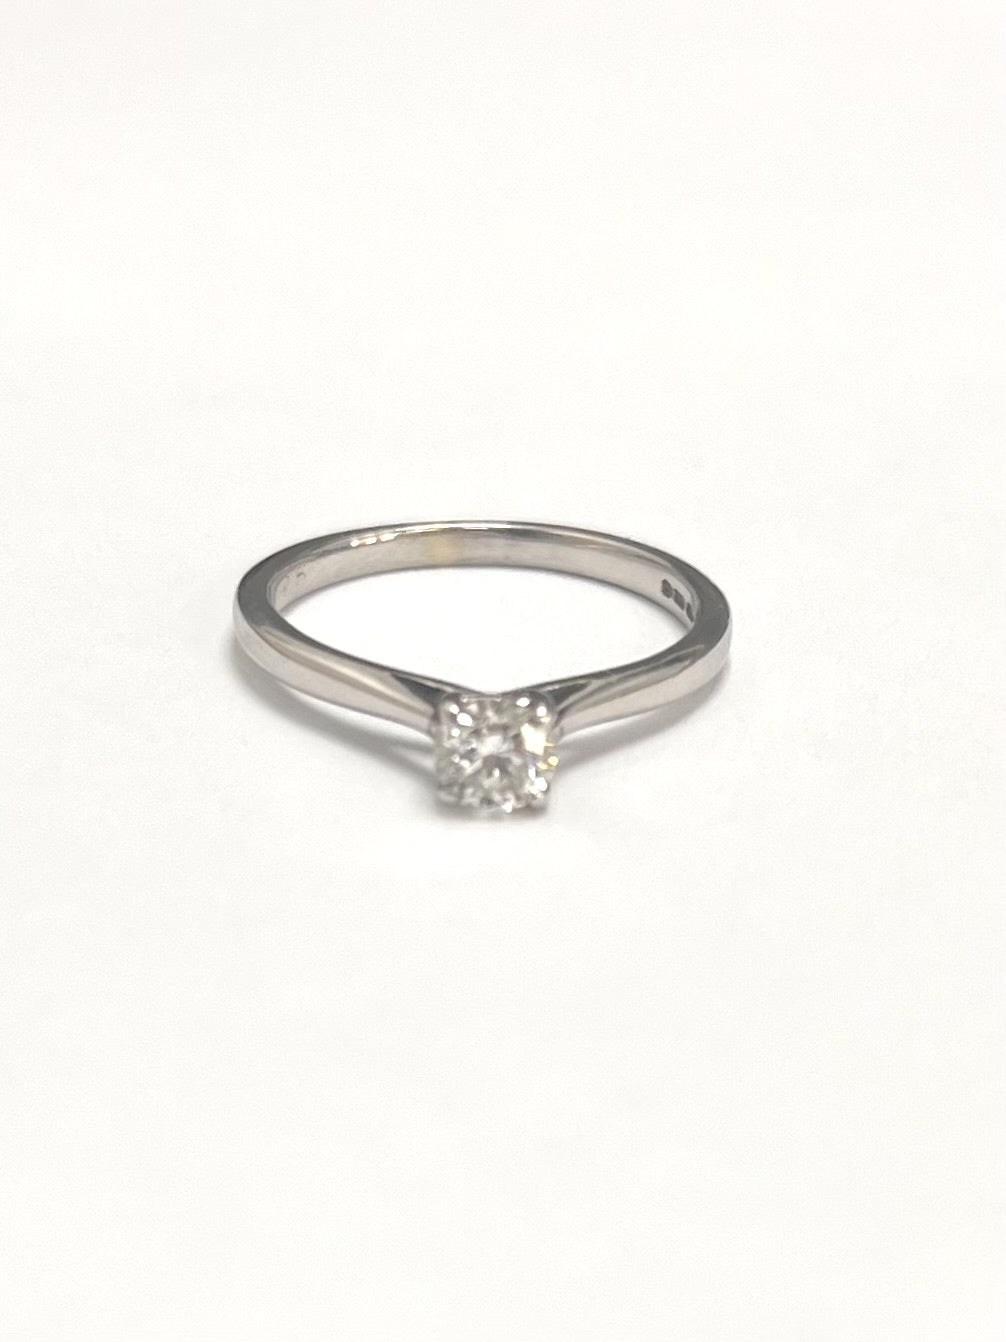 9ct White Gold 0.26cts Solitaire Diamond Ring